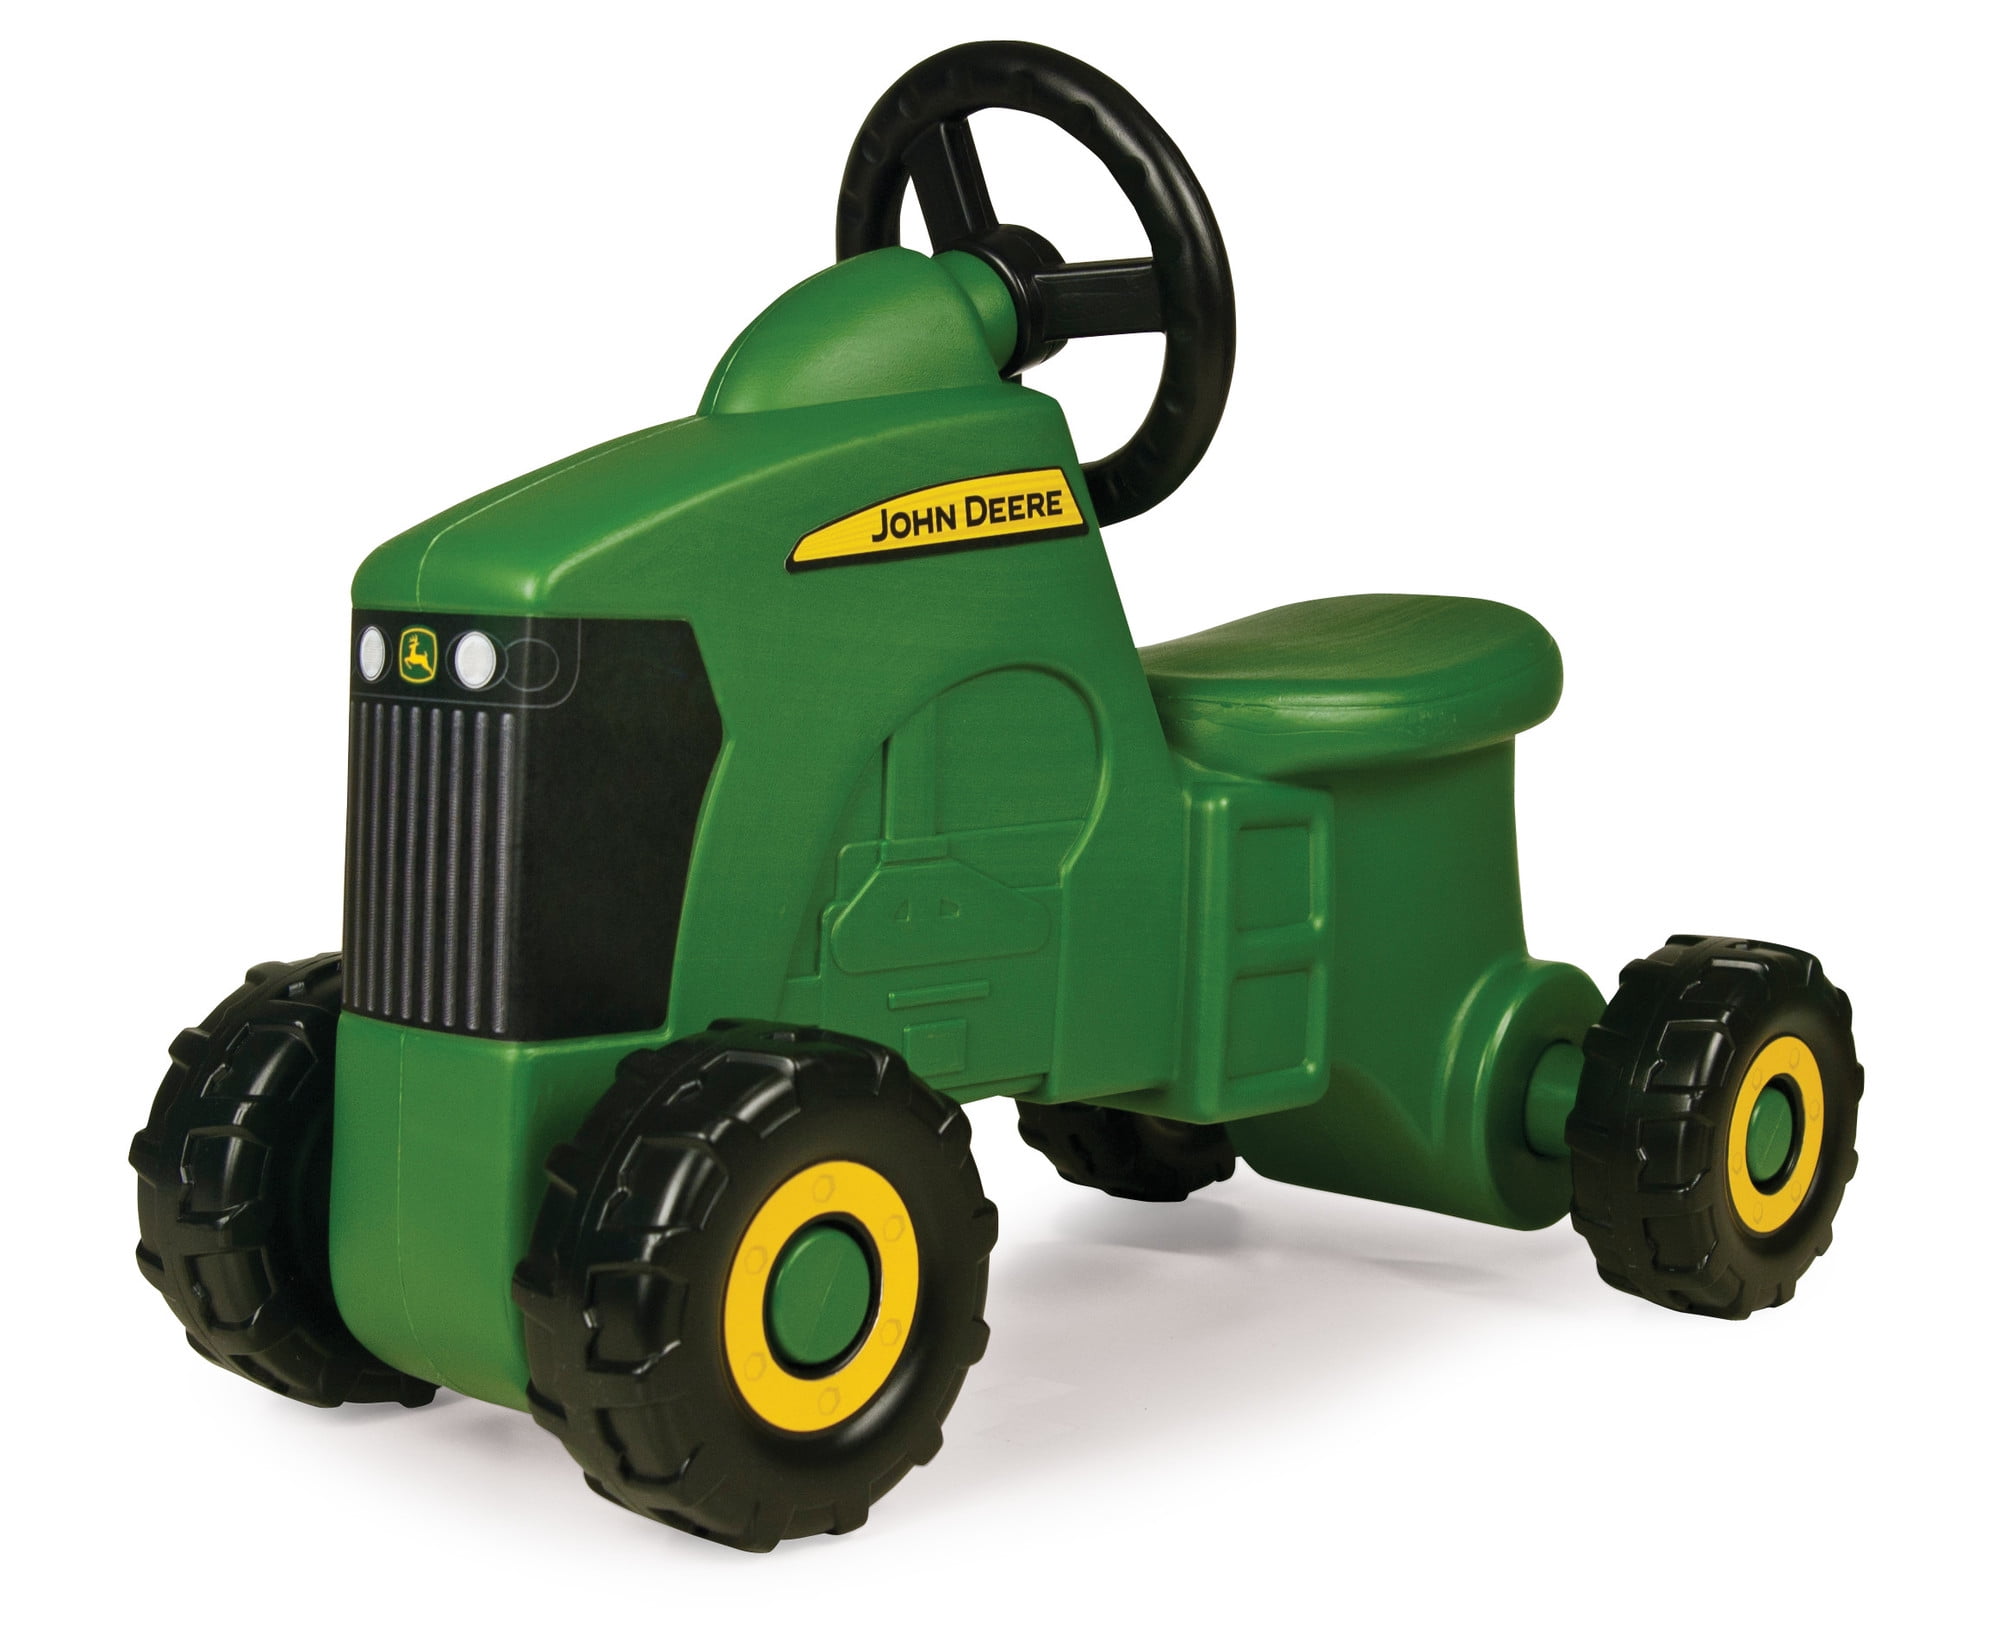 John Deere Foot to Floor Ride On Tractor Toy, Toddler Tractor Ride On Vehicle, Green